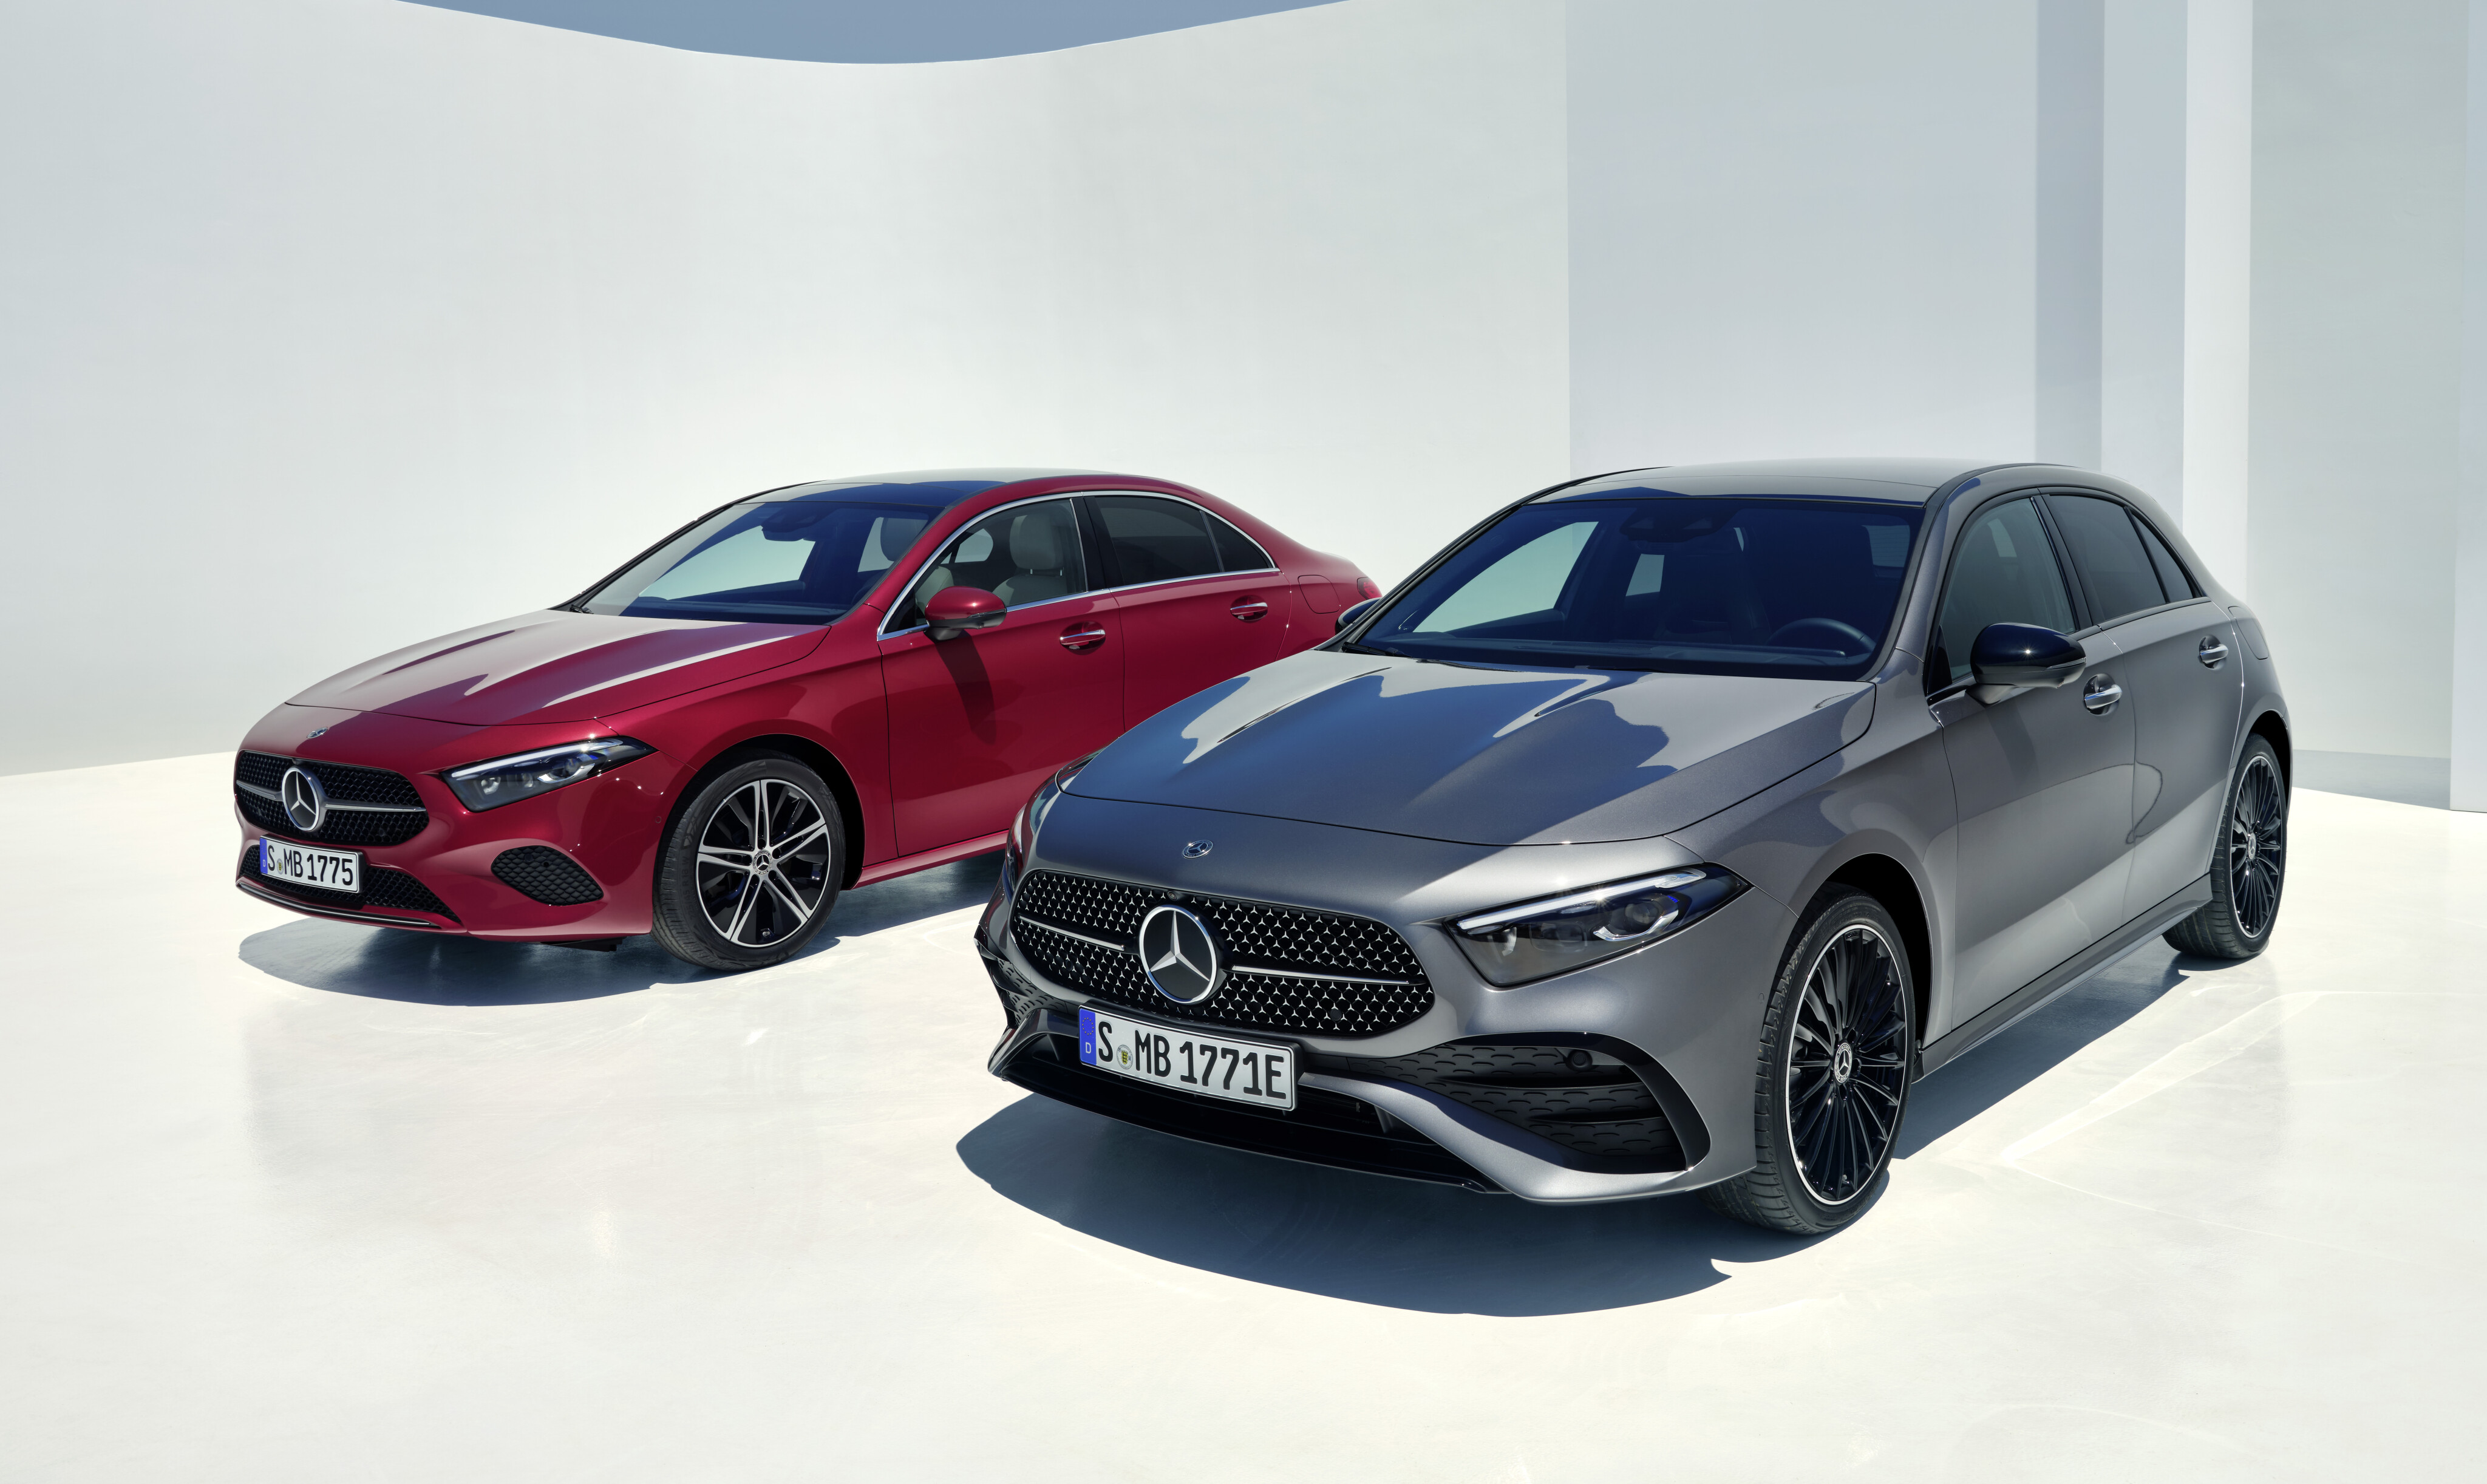 2023 MercedesBenz AClass pricing and features Entry price up 10K